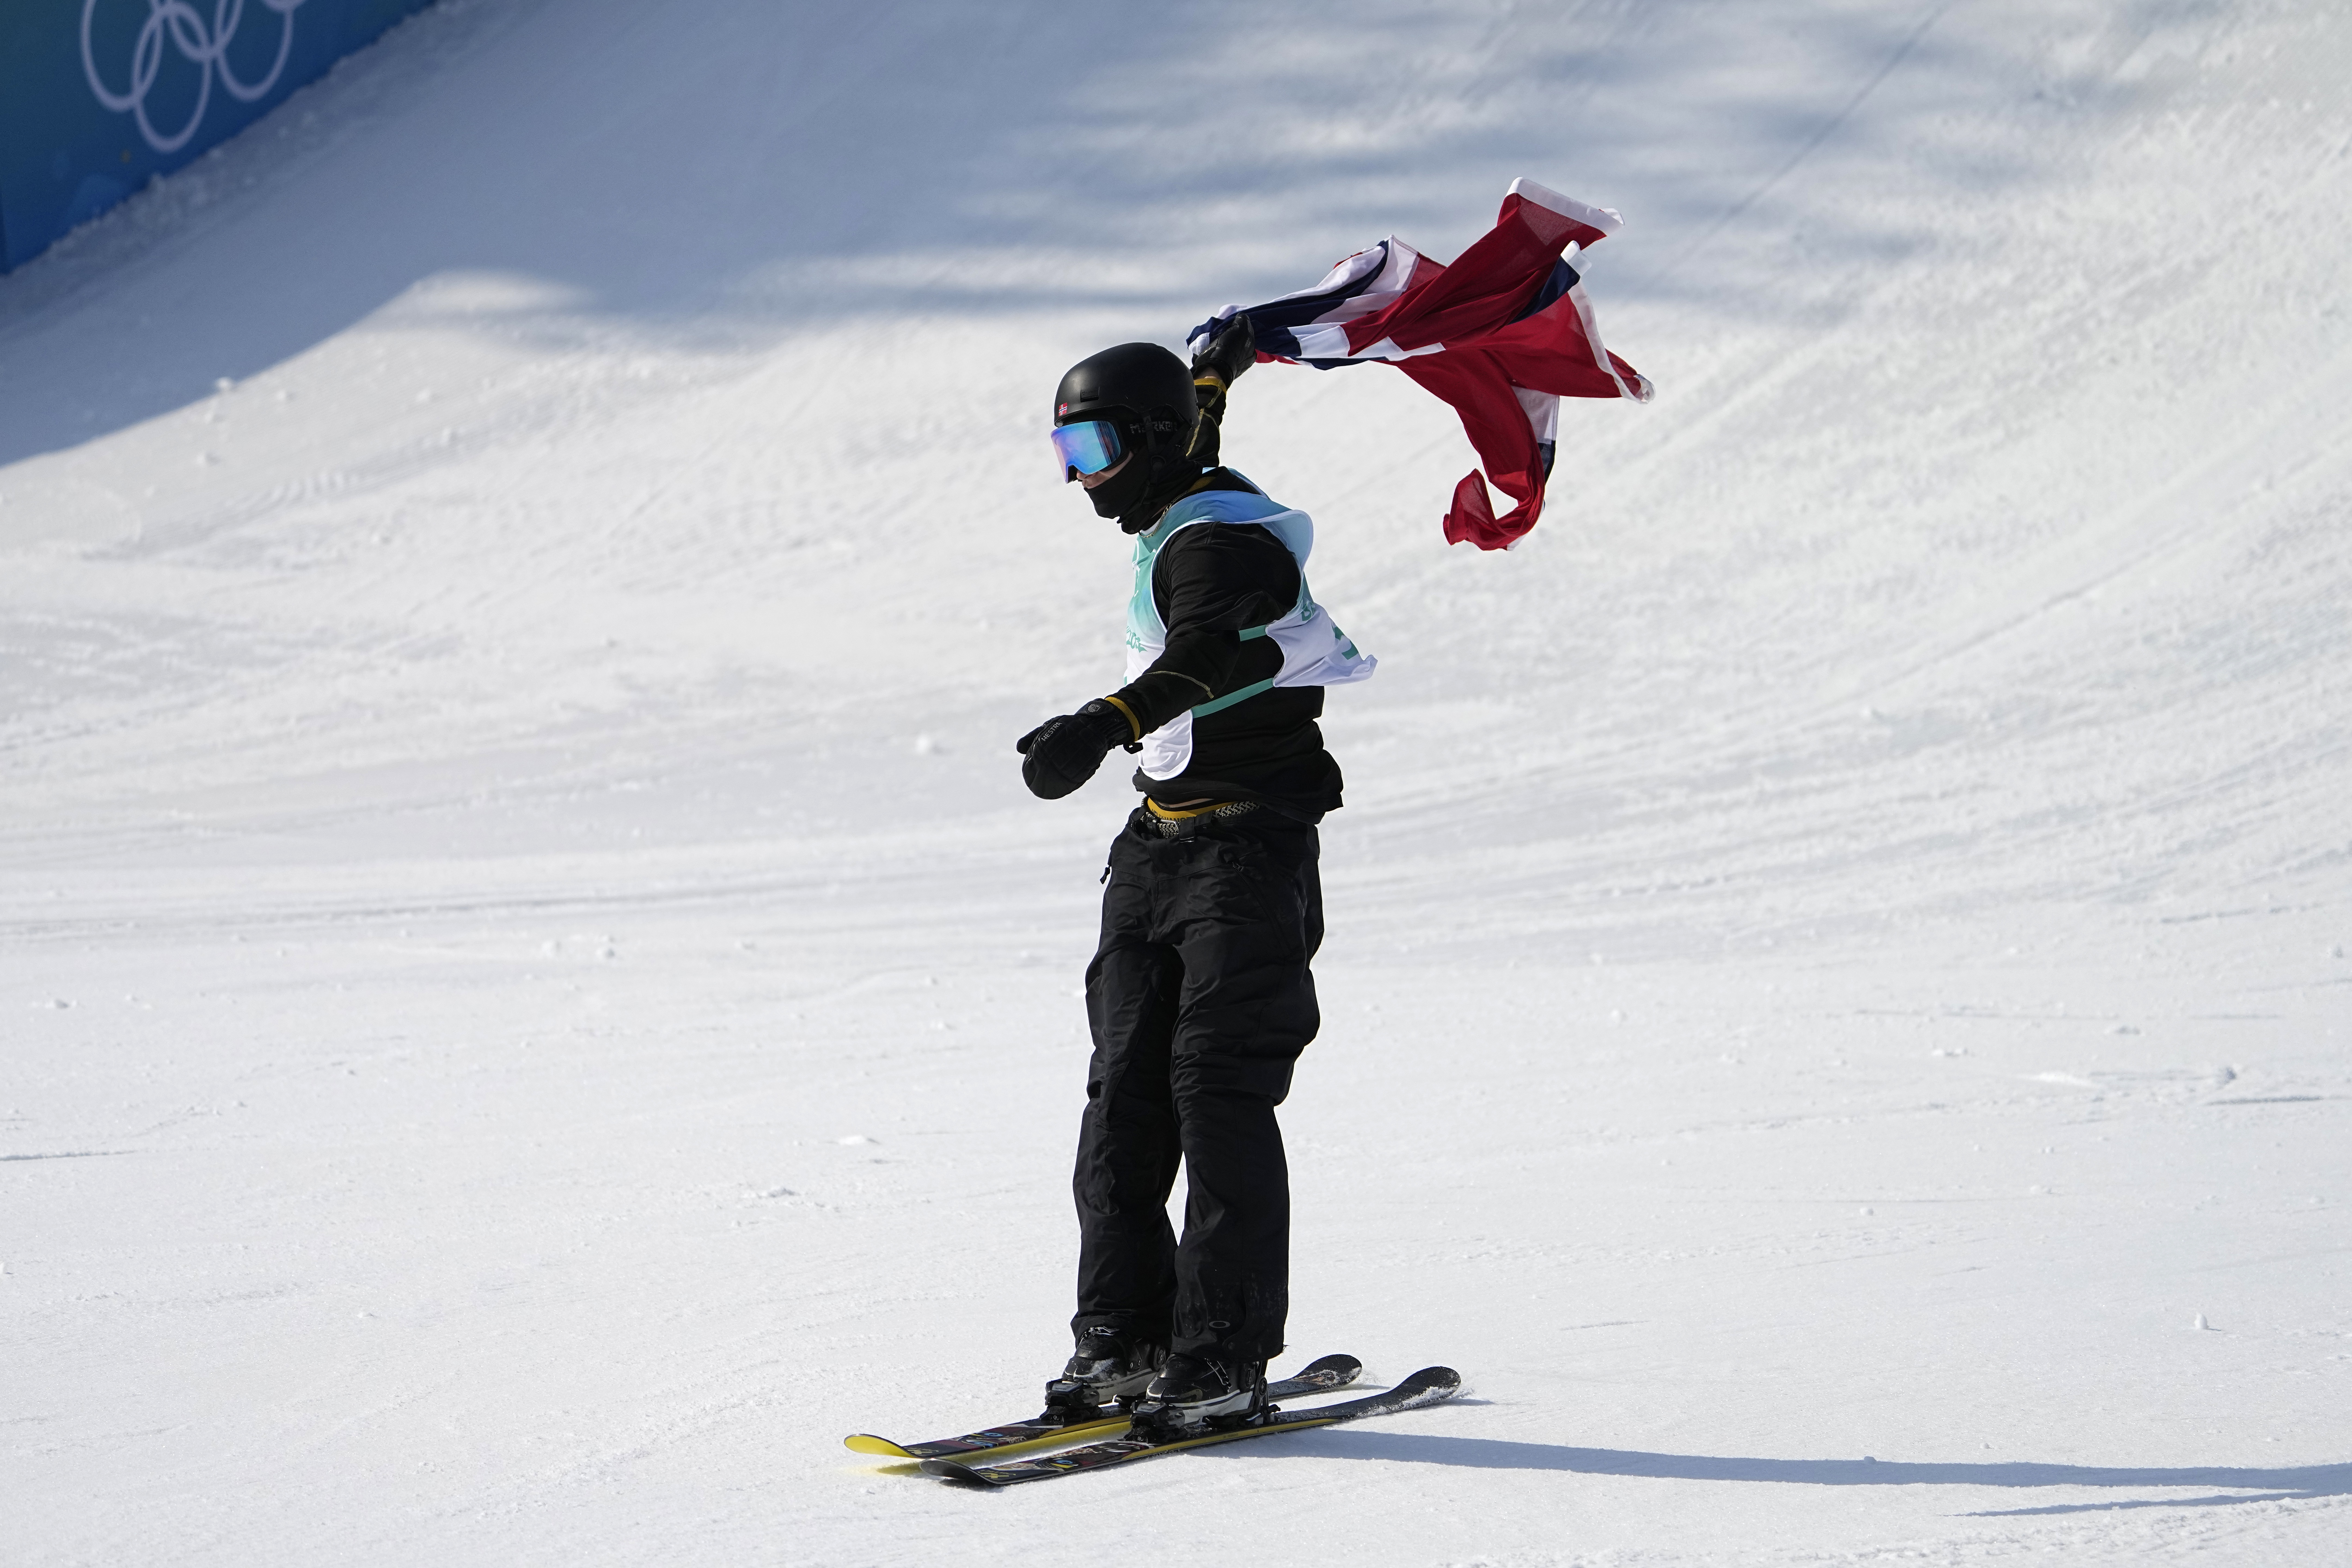 Birk Ruud of Norway celebrates after a "nice" run at the men's freestyle skiing big air finals.